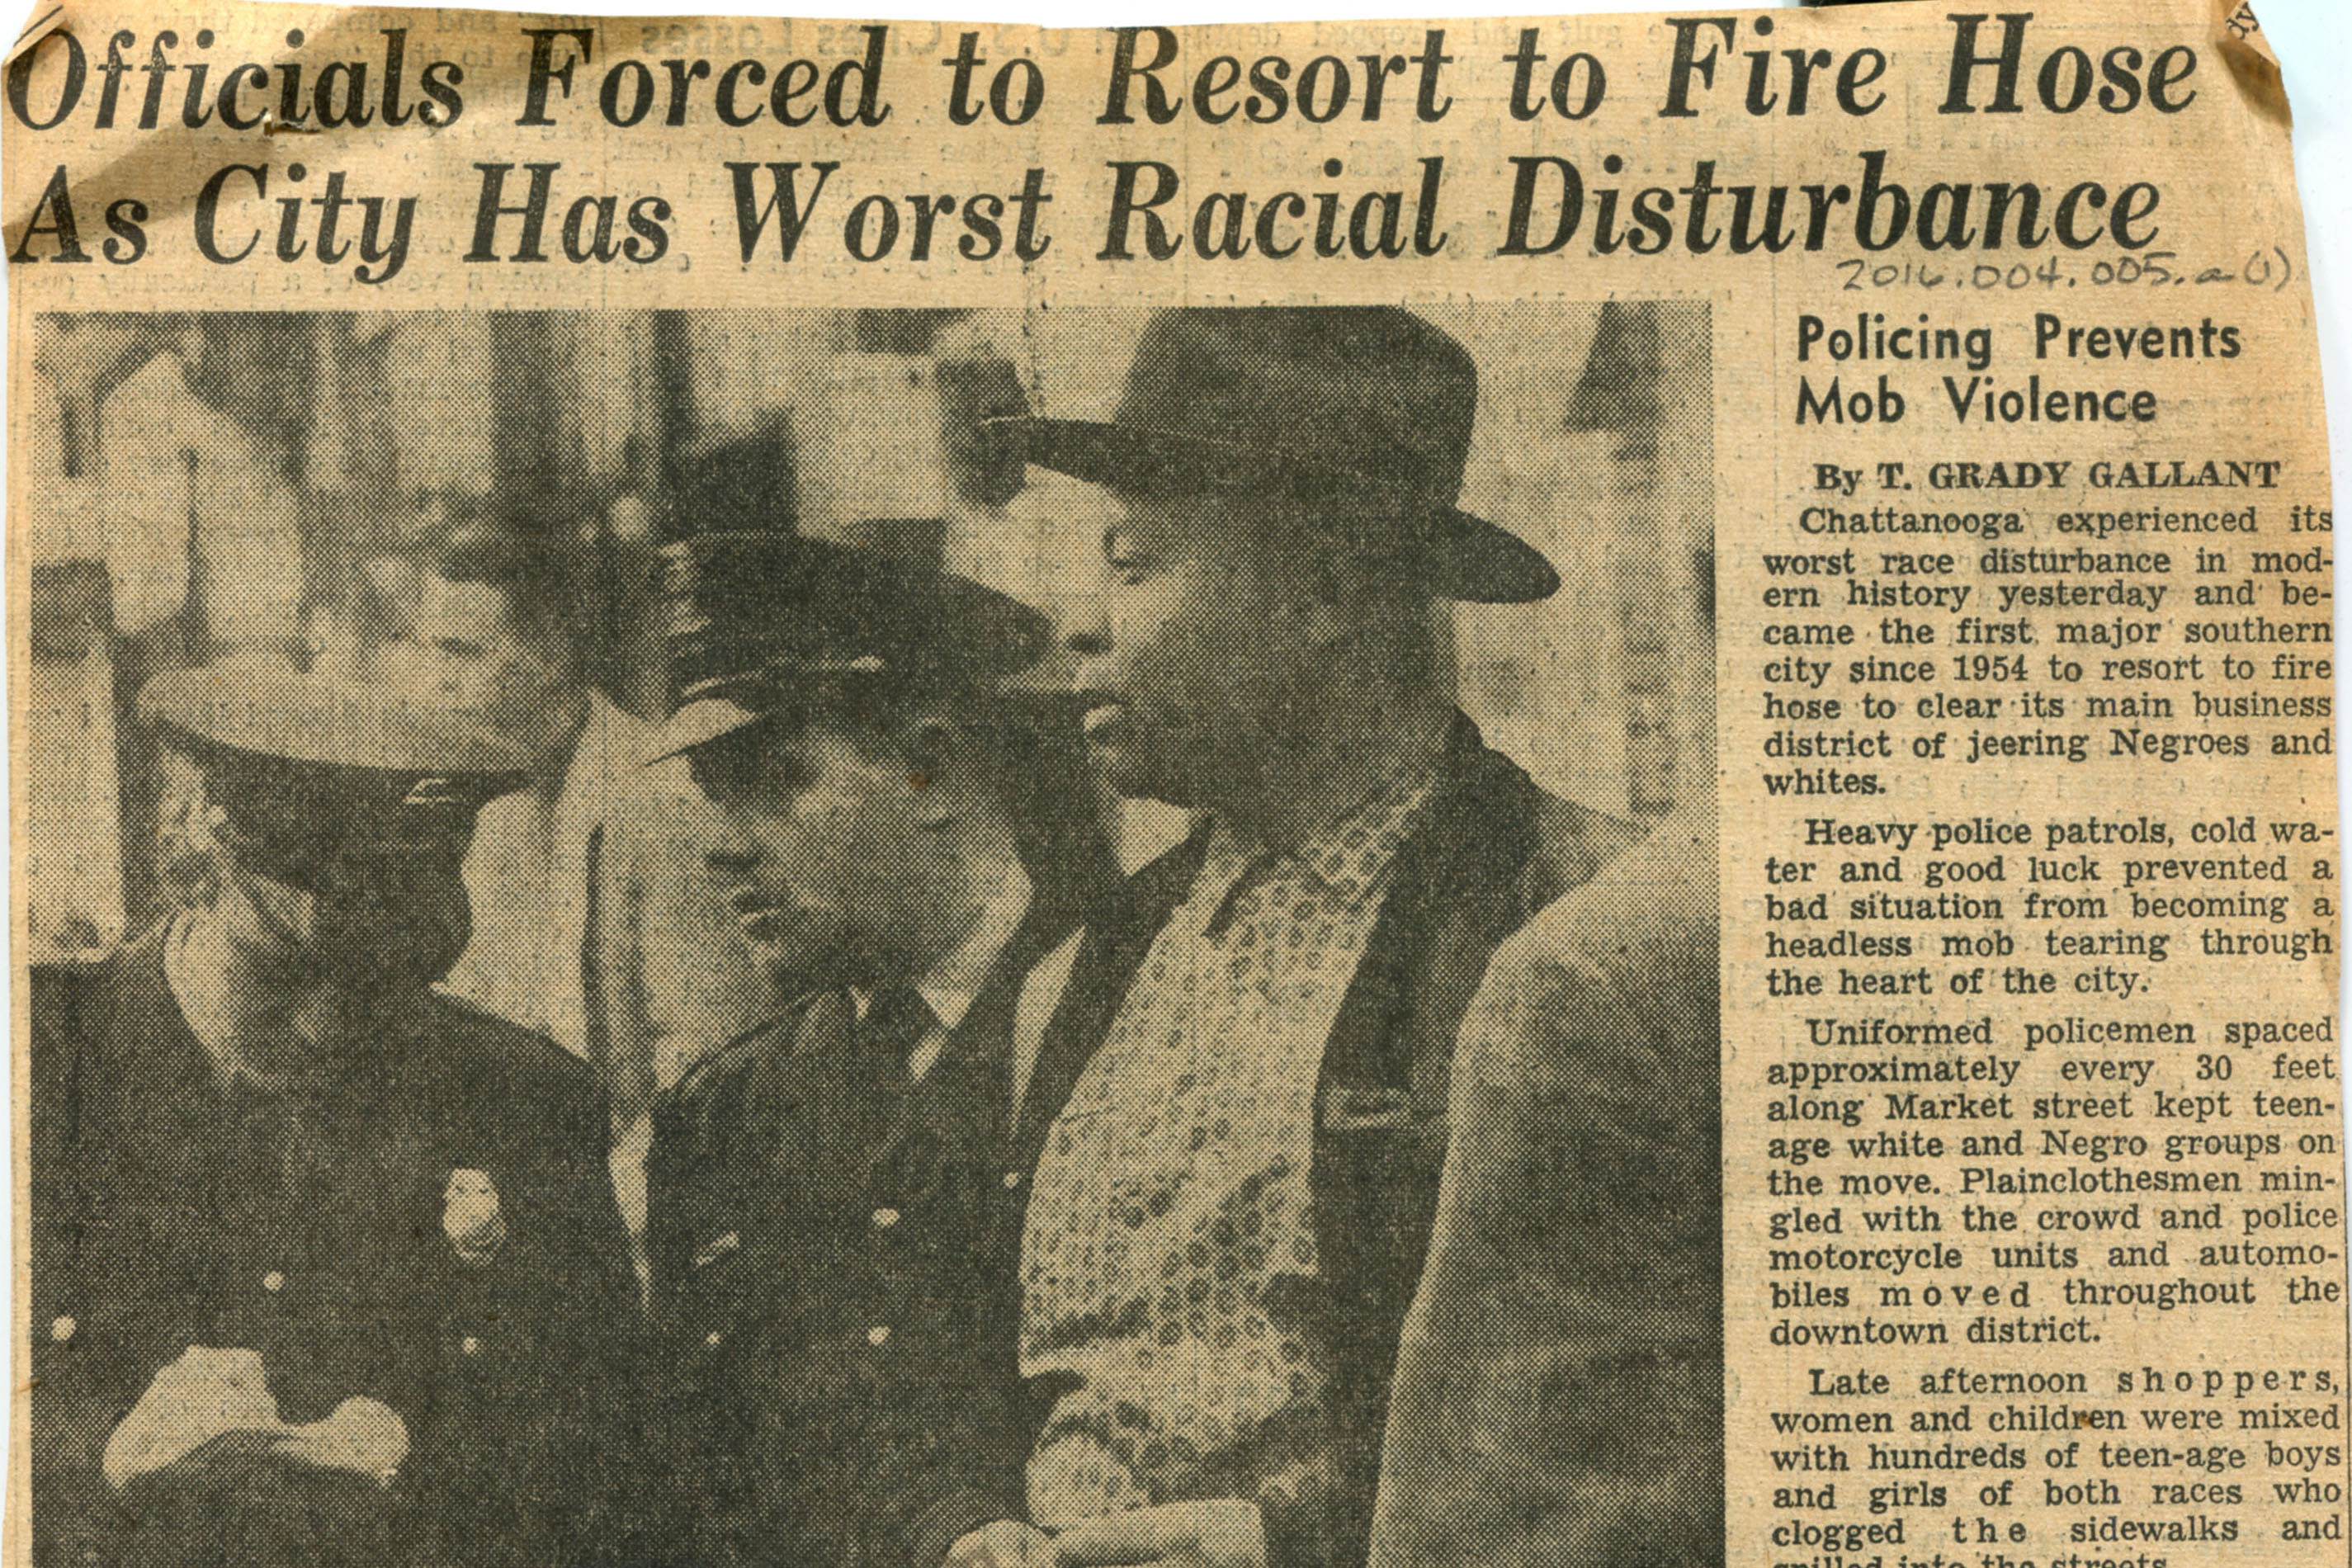 &#39;Officials Forced To Resort To Fire Hose As City Has Worst Racial Disturbance&#39; newspaper clipping, 1960 February 25, by the Chattanooga News-Free Press. Courtesy of the Chattanooga Public Library and the University of Tennessee at Chattanooga Special Collections.